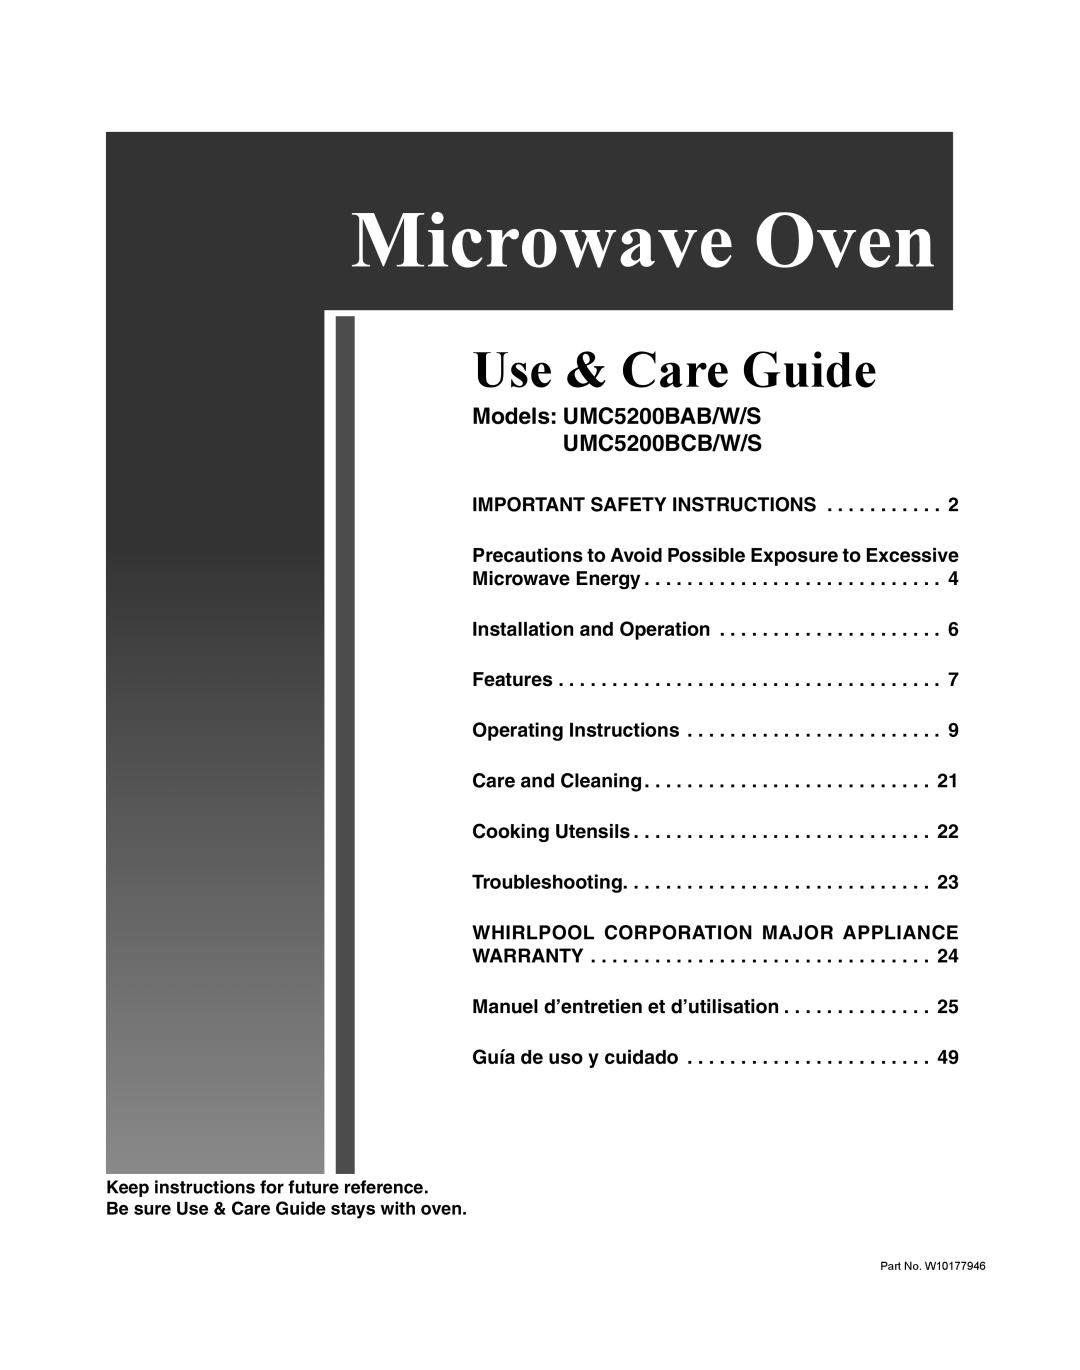 Maytag UMC5200BCW important safety instructions Use & Care Guide, Models UMC5200BAB/W/S UMC5200BCB/W/S, Microwave Oven 